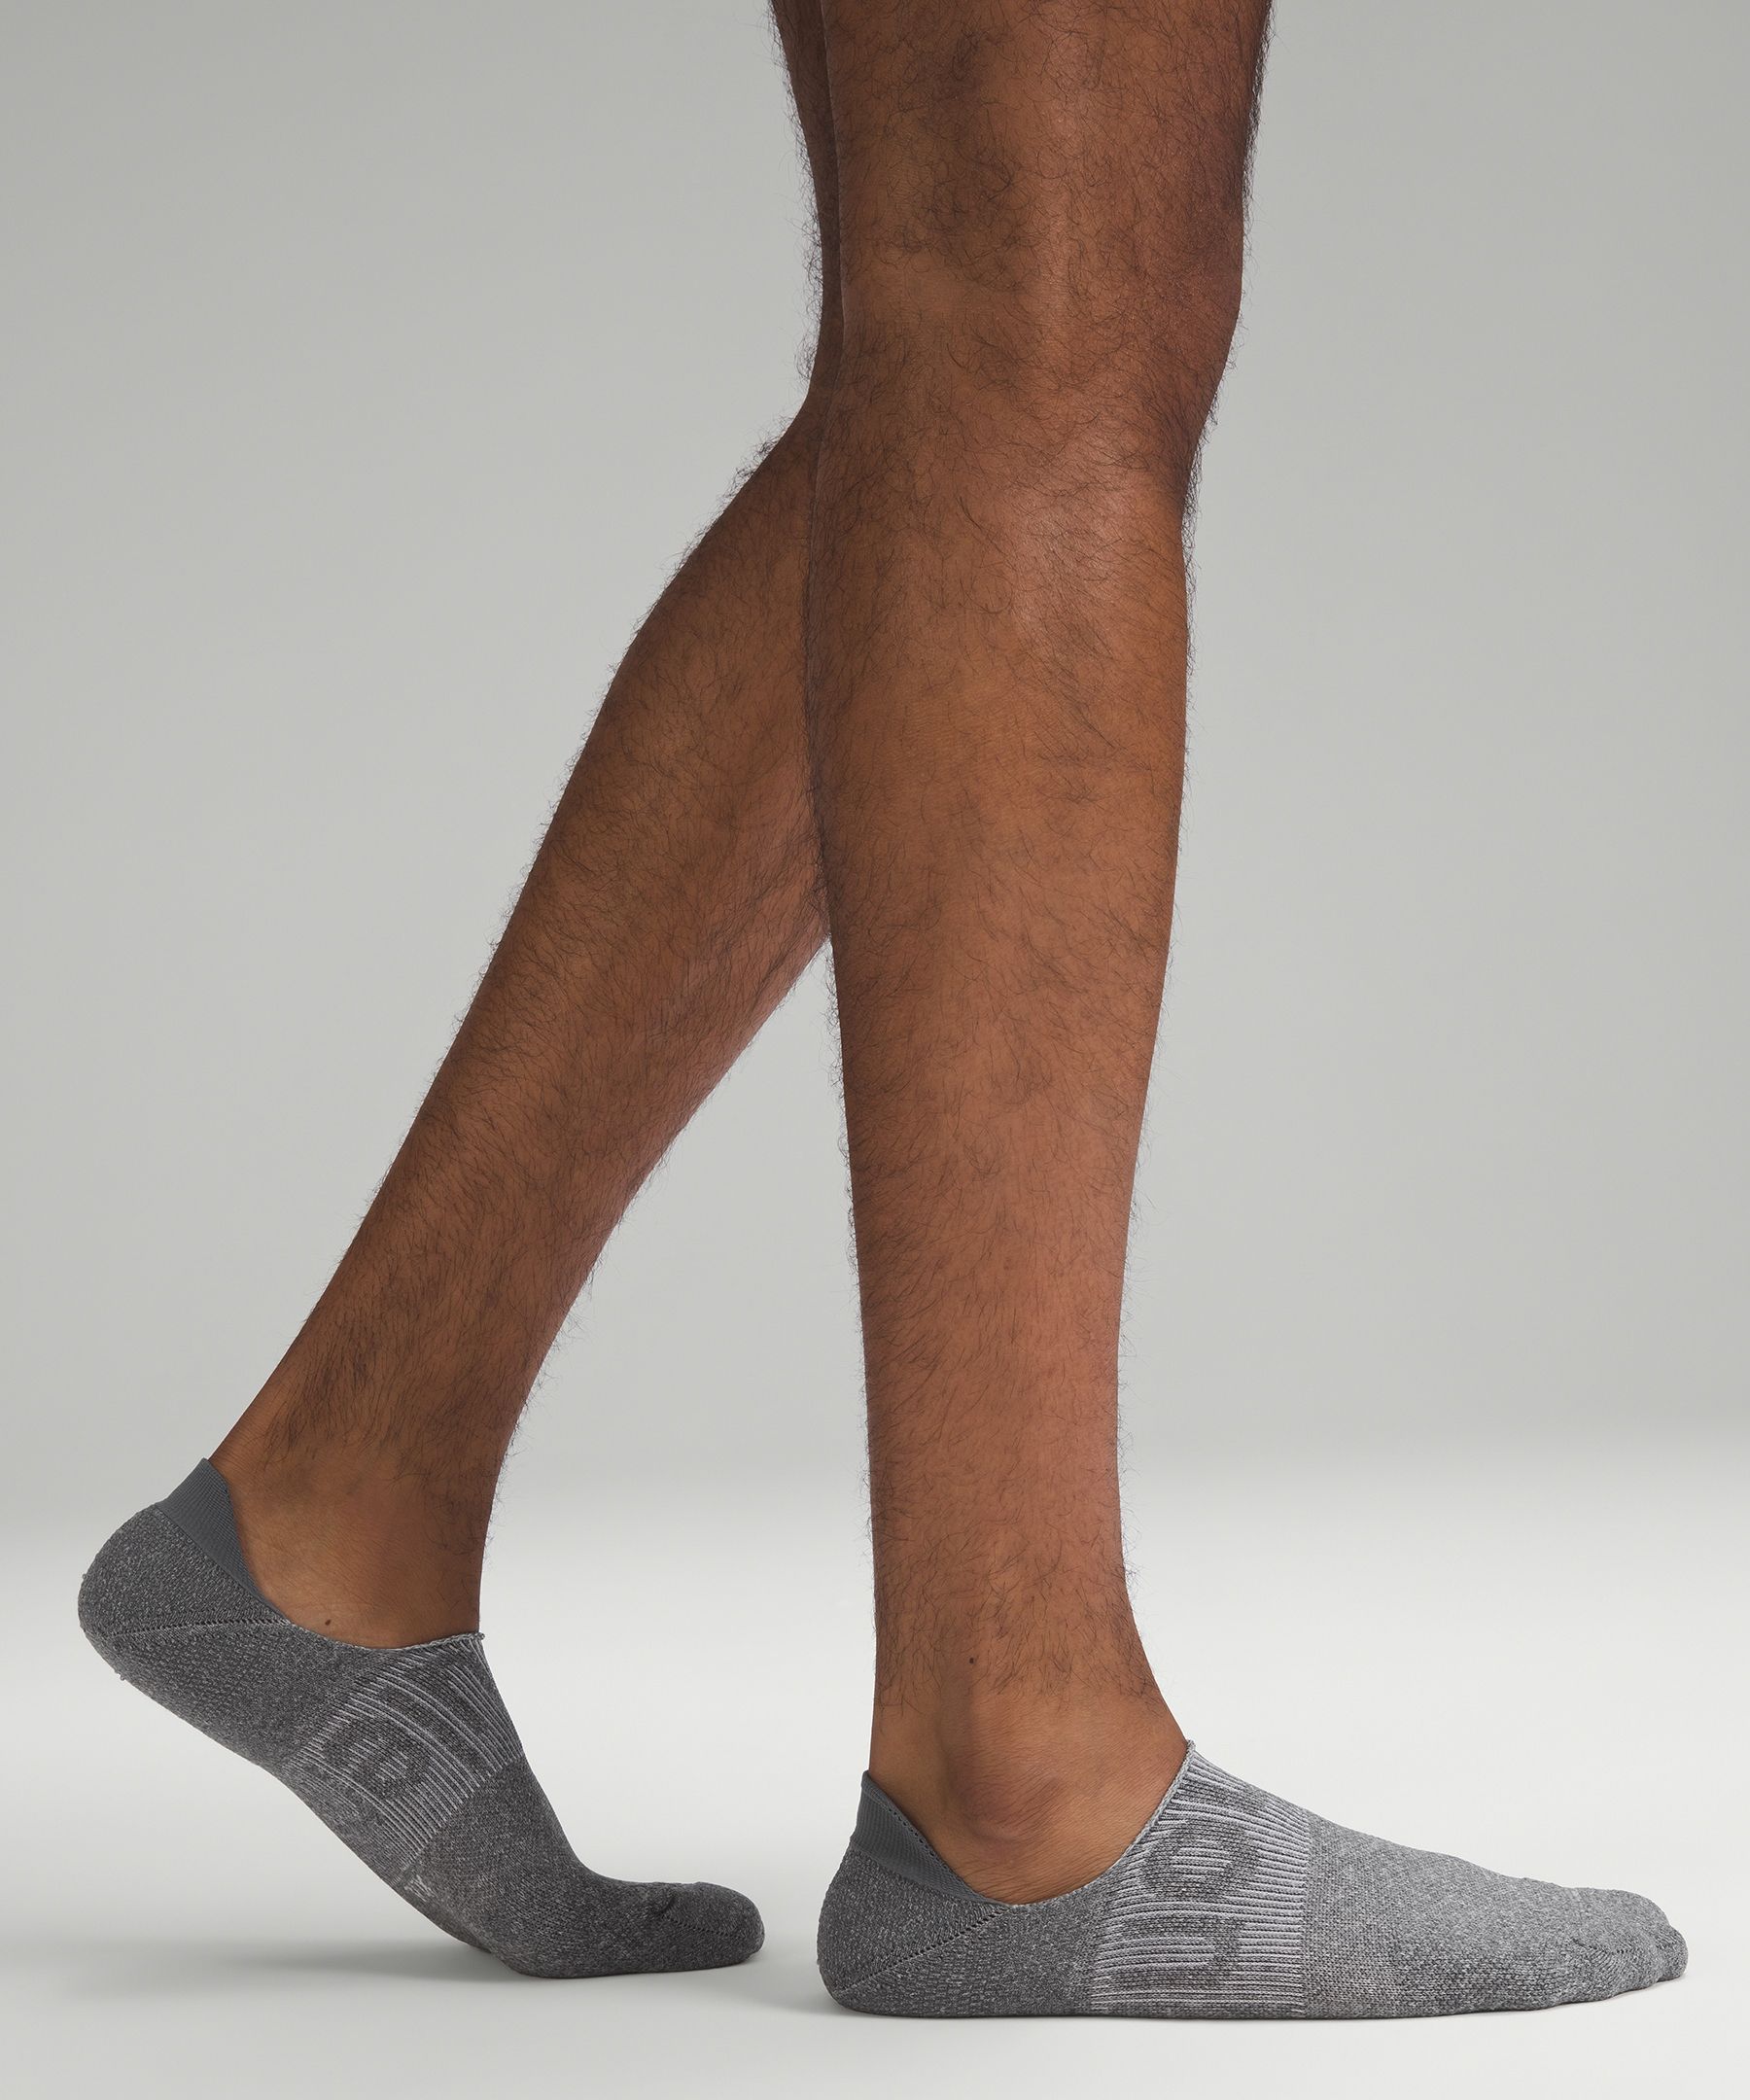 Lululemon Men's Power Stride No-Show Sock with Active Grip 3 Pack. 2